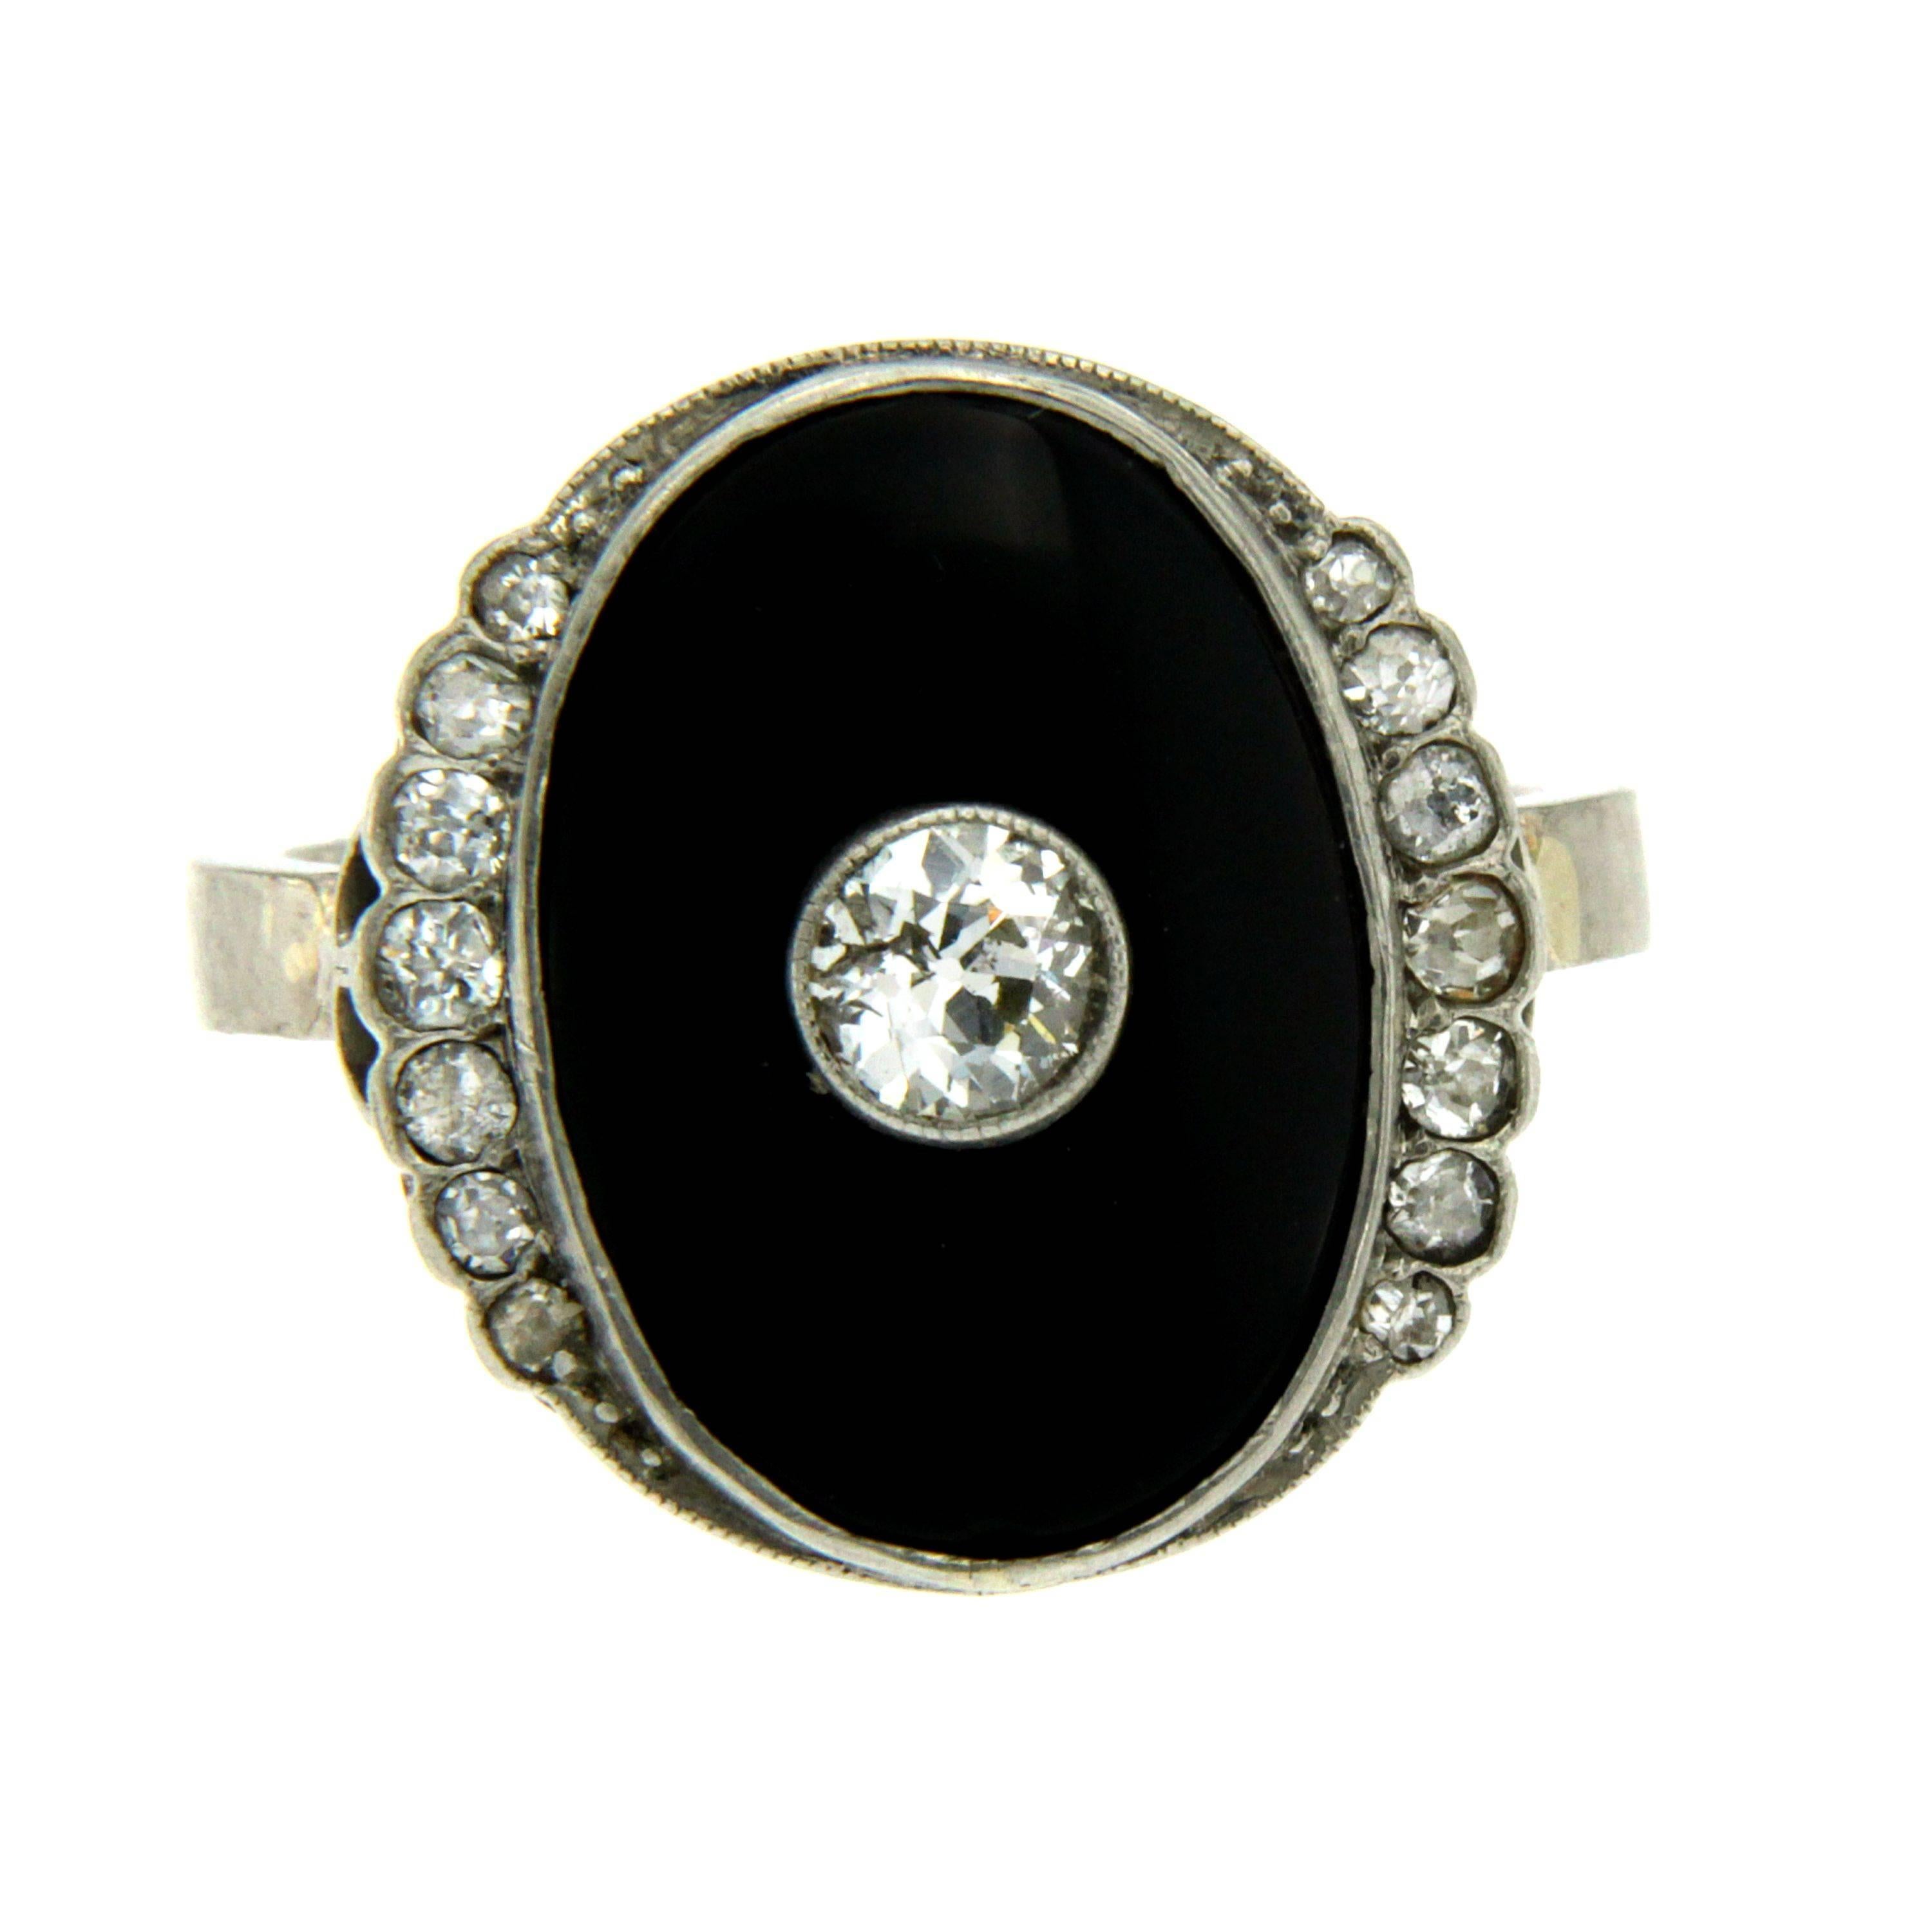 A magnificent Art Deco ring, featuring round cut diamonds, surrounded by onyx and a fine diamond surround, set in 18k gold.
Total diamond weight: about 0.50 carat. G color Vvs2 clarity

Gross Weight: 8.1 Gr.
Ring Size - US 10 - IT 22 - FR 62 -